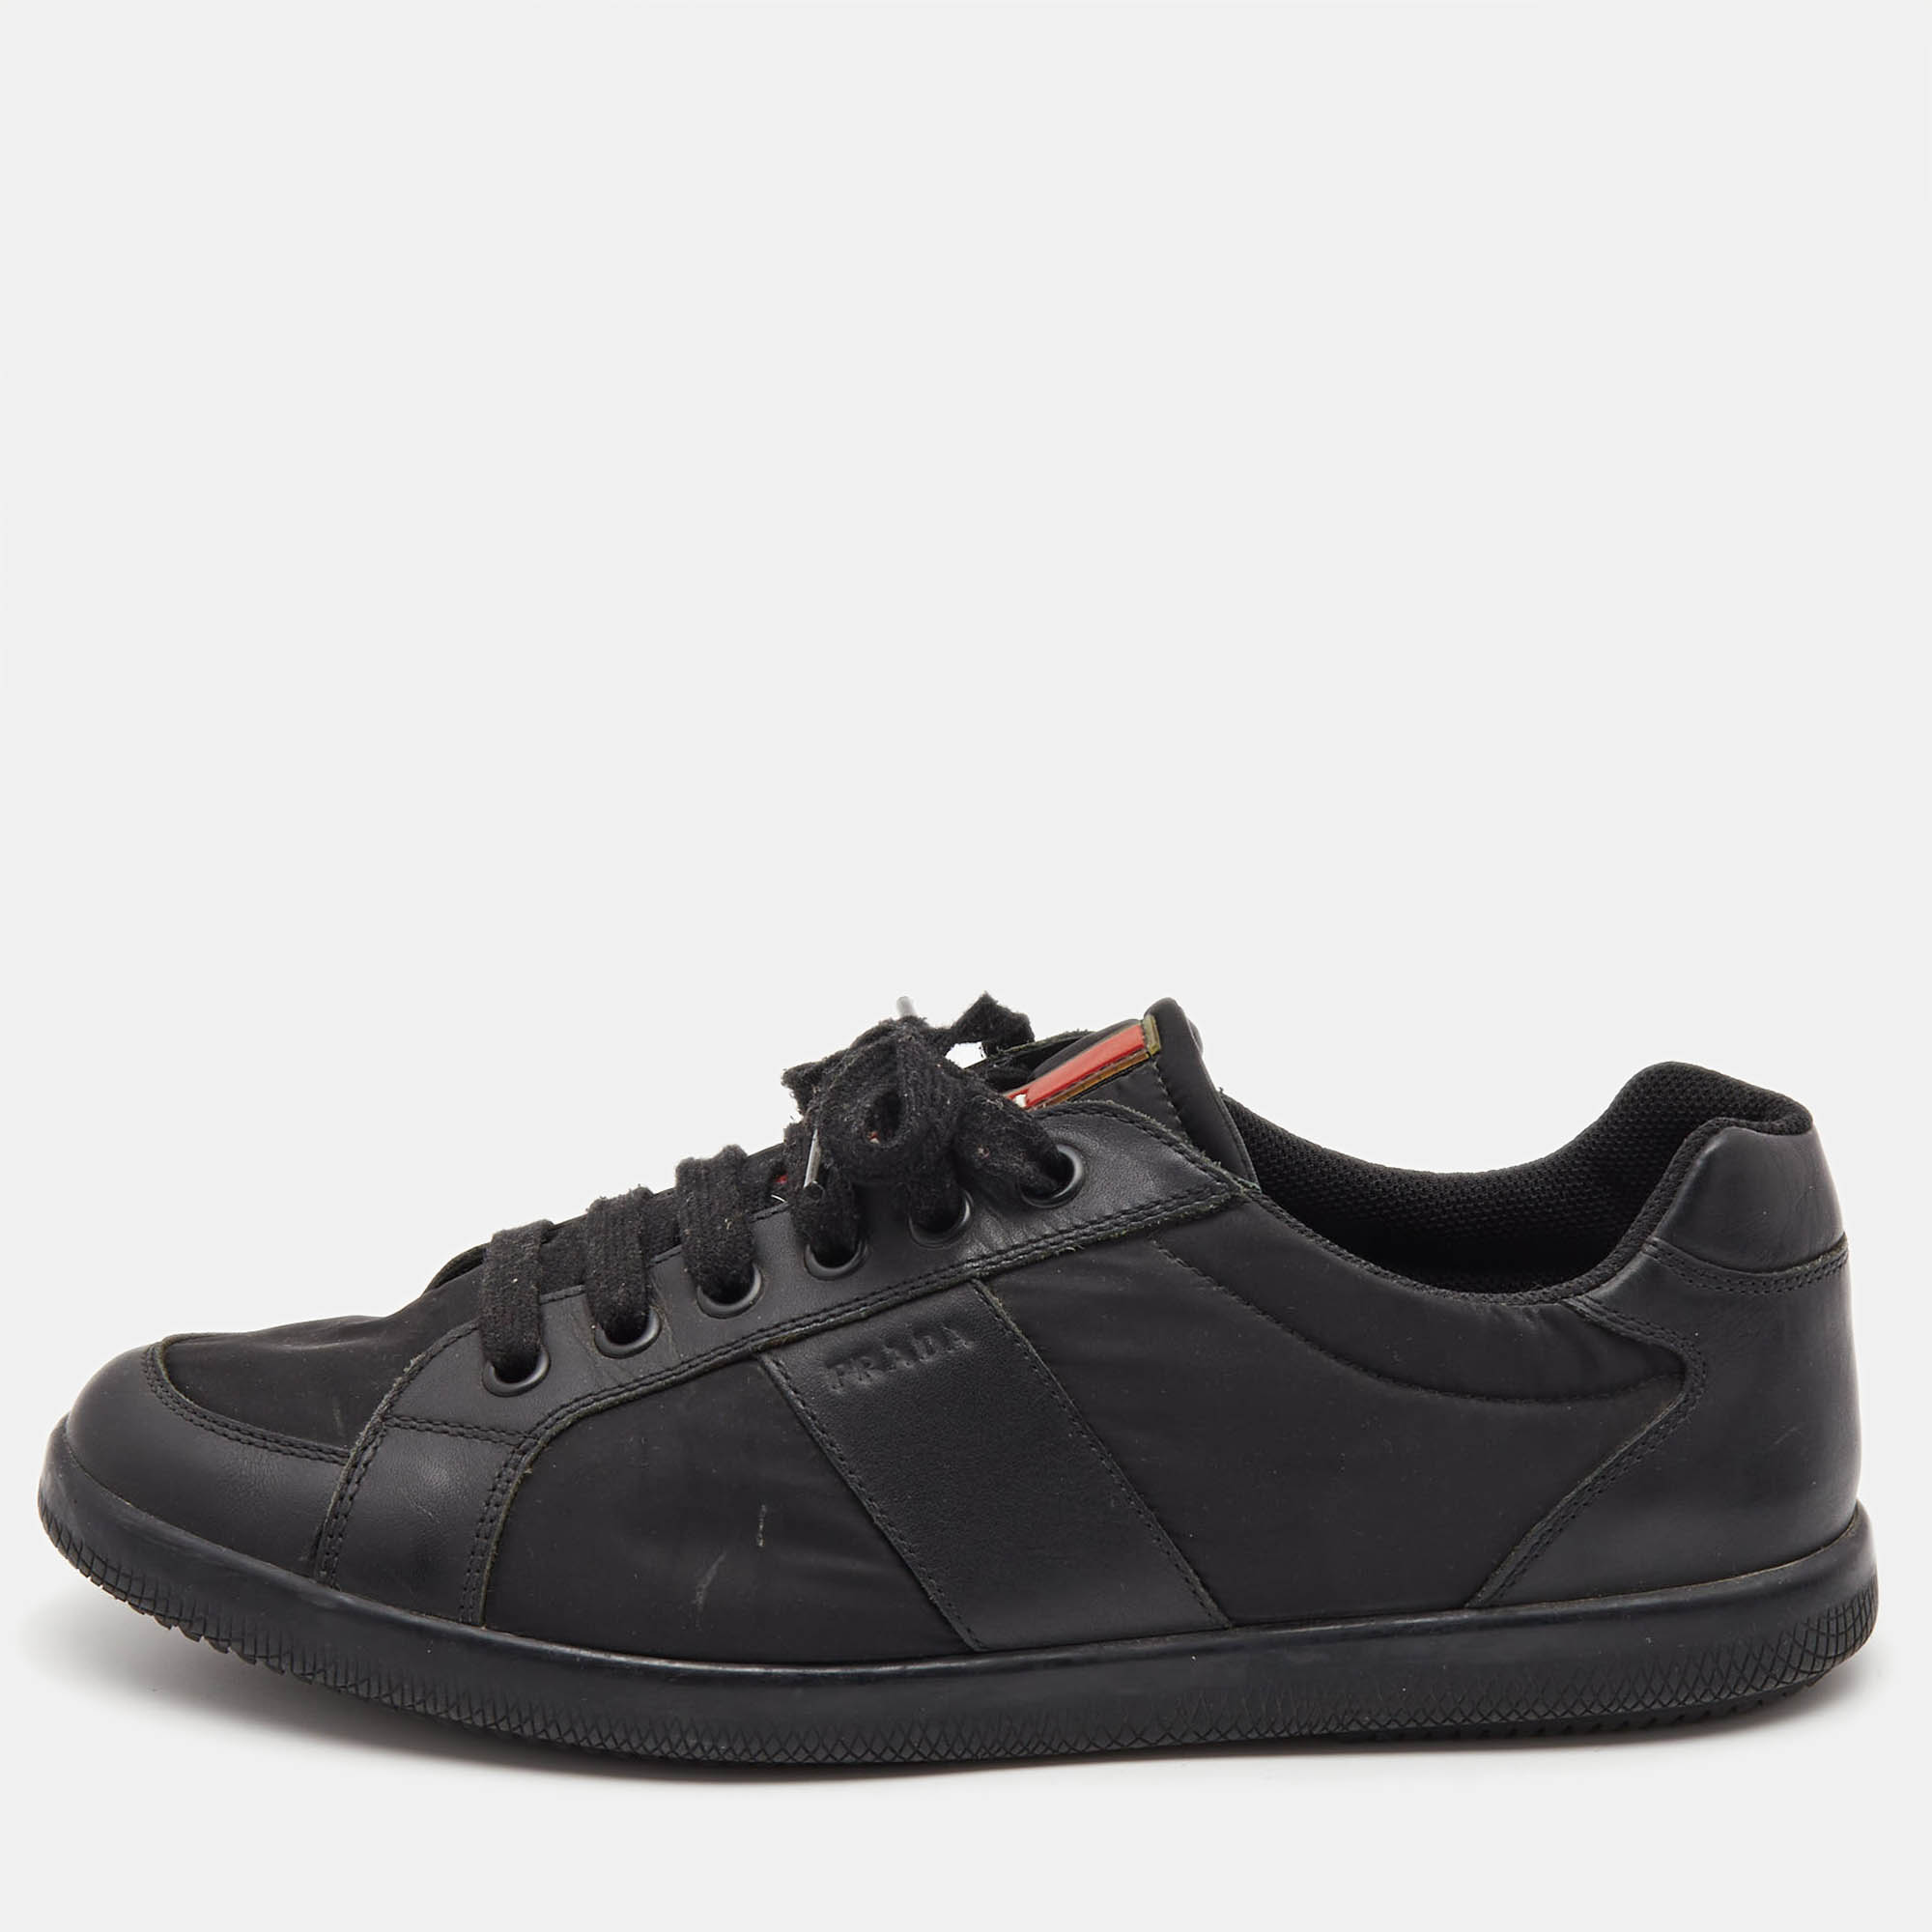 Prada Black Leather And Nyon Low Top Sneakers Size 44